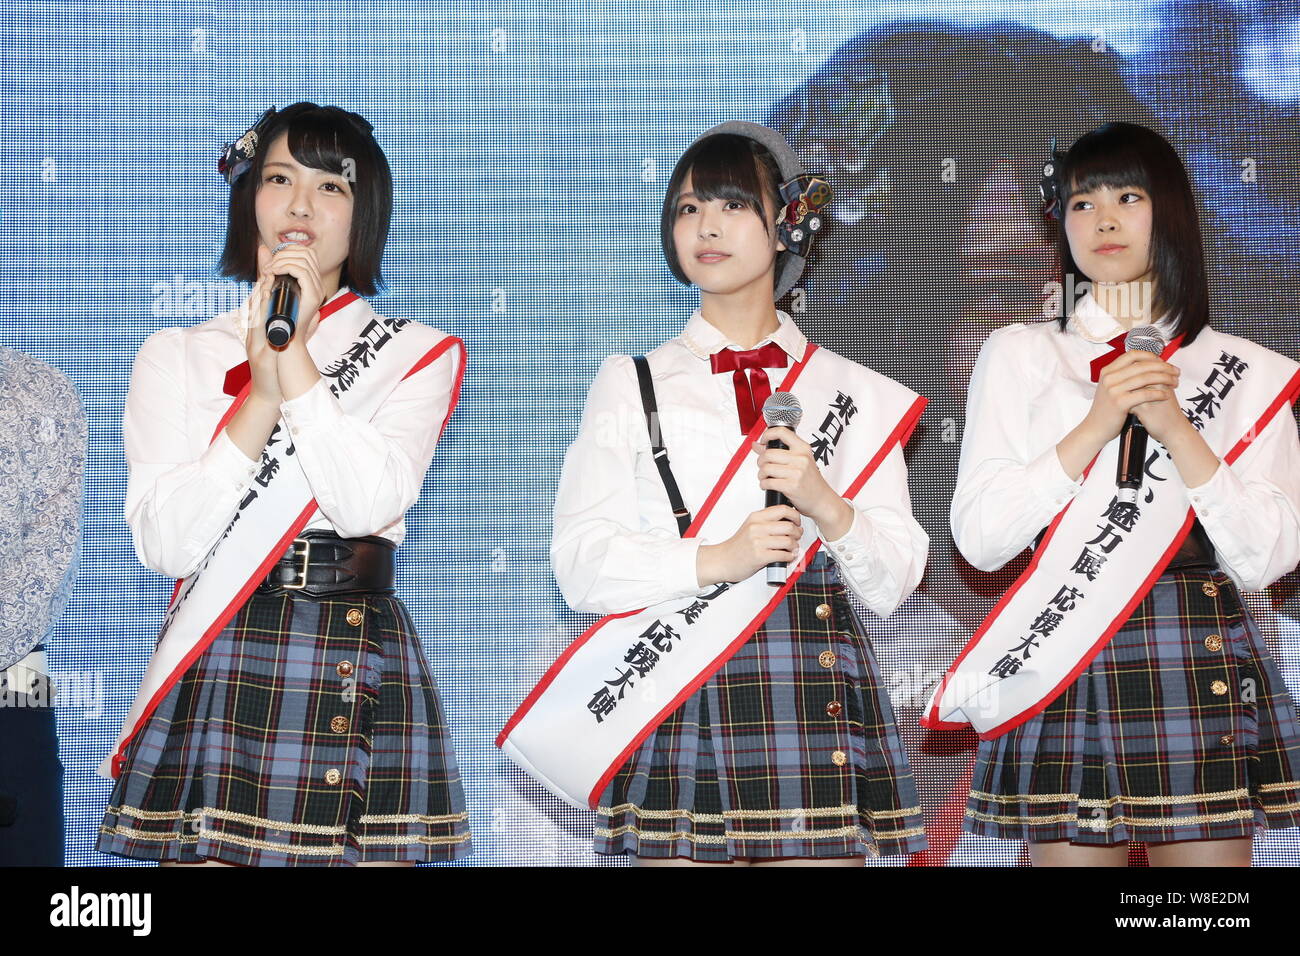 (From left) Maria Shimizu, Shiori Sato and Nanase Yoshikawa of the Team 8 of Japanese idol gril group AKB48 attend a promotional event for Japanese fo Stock Photo